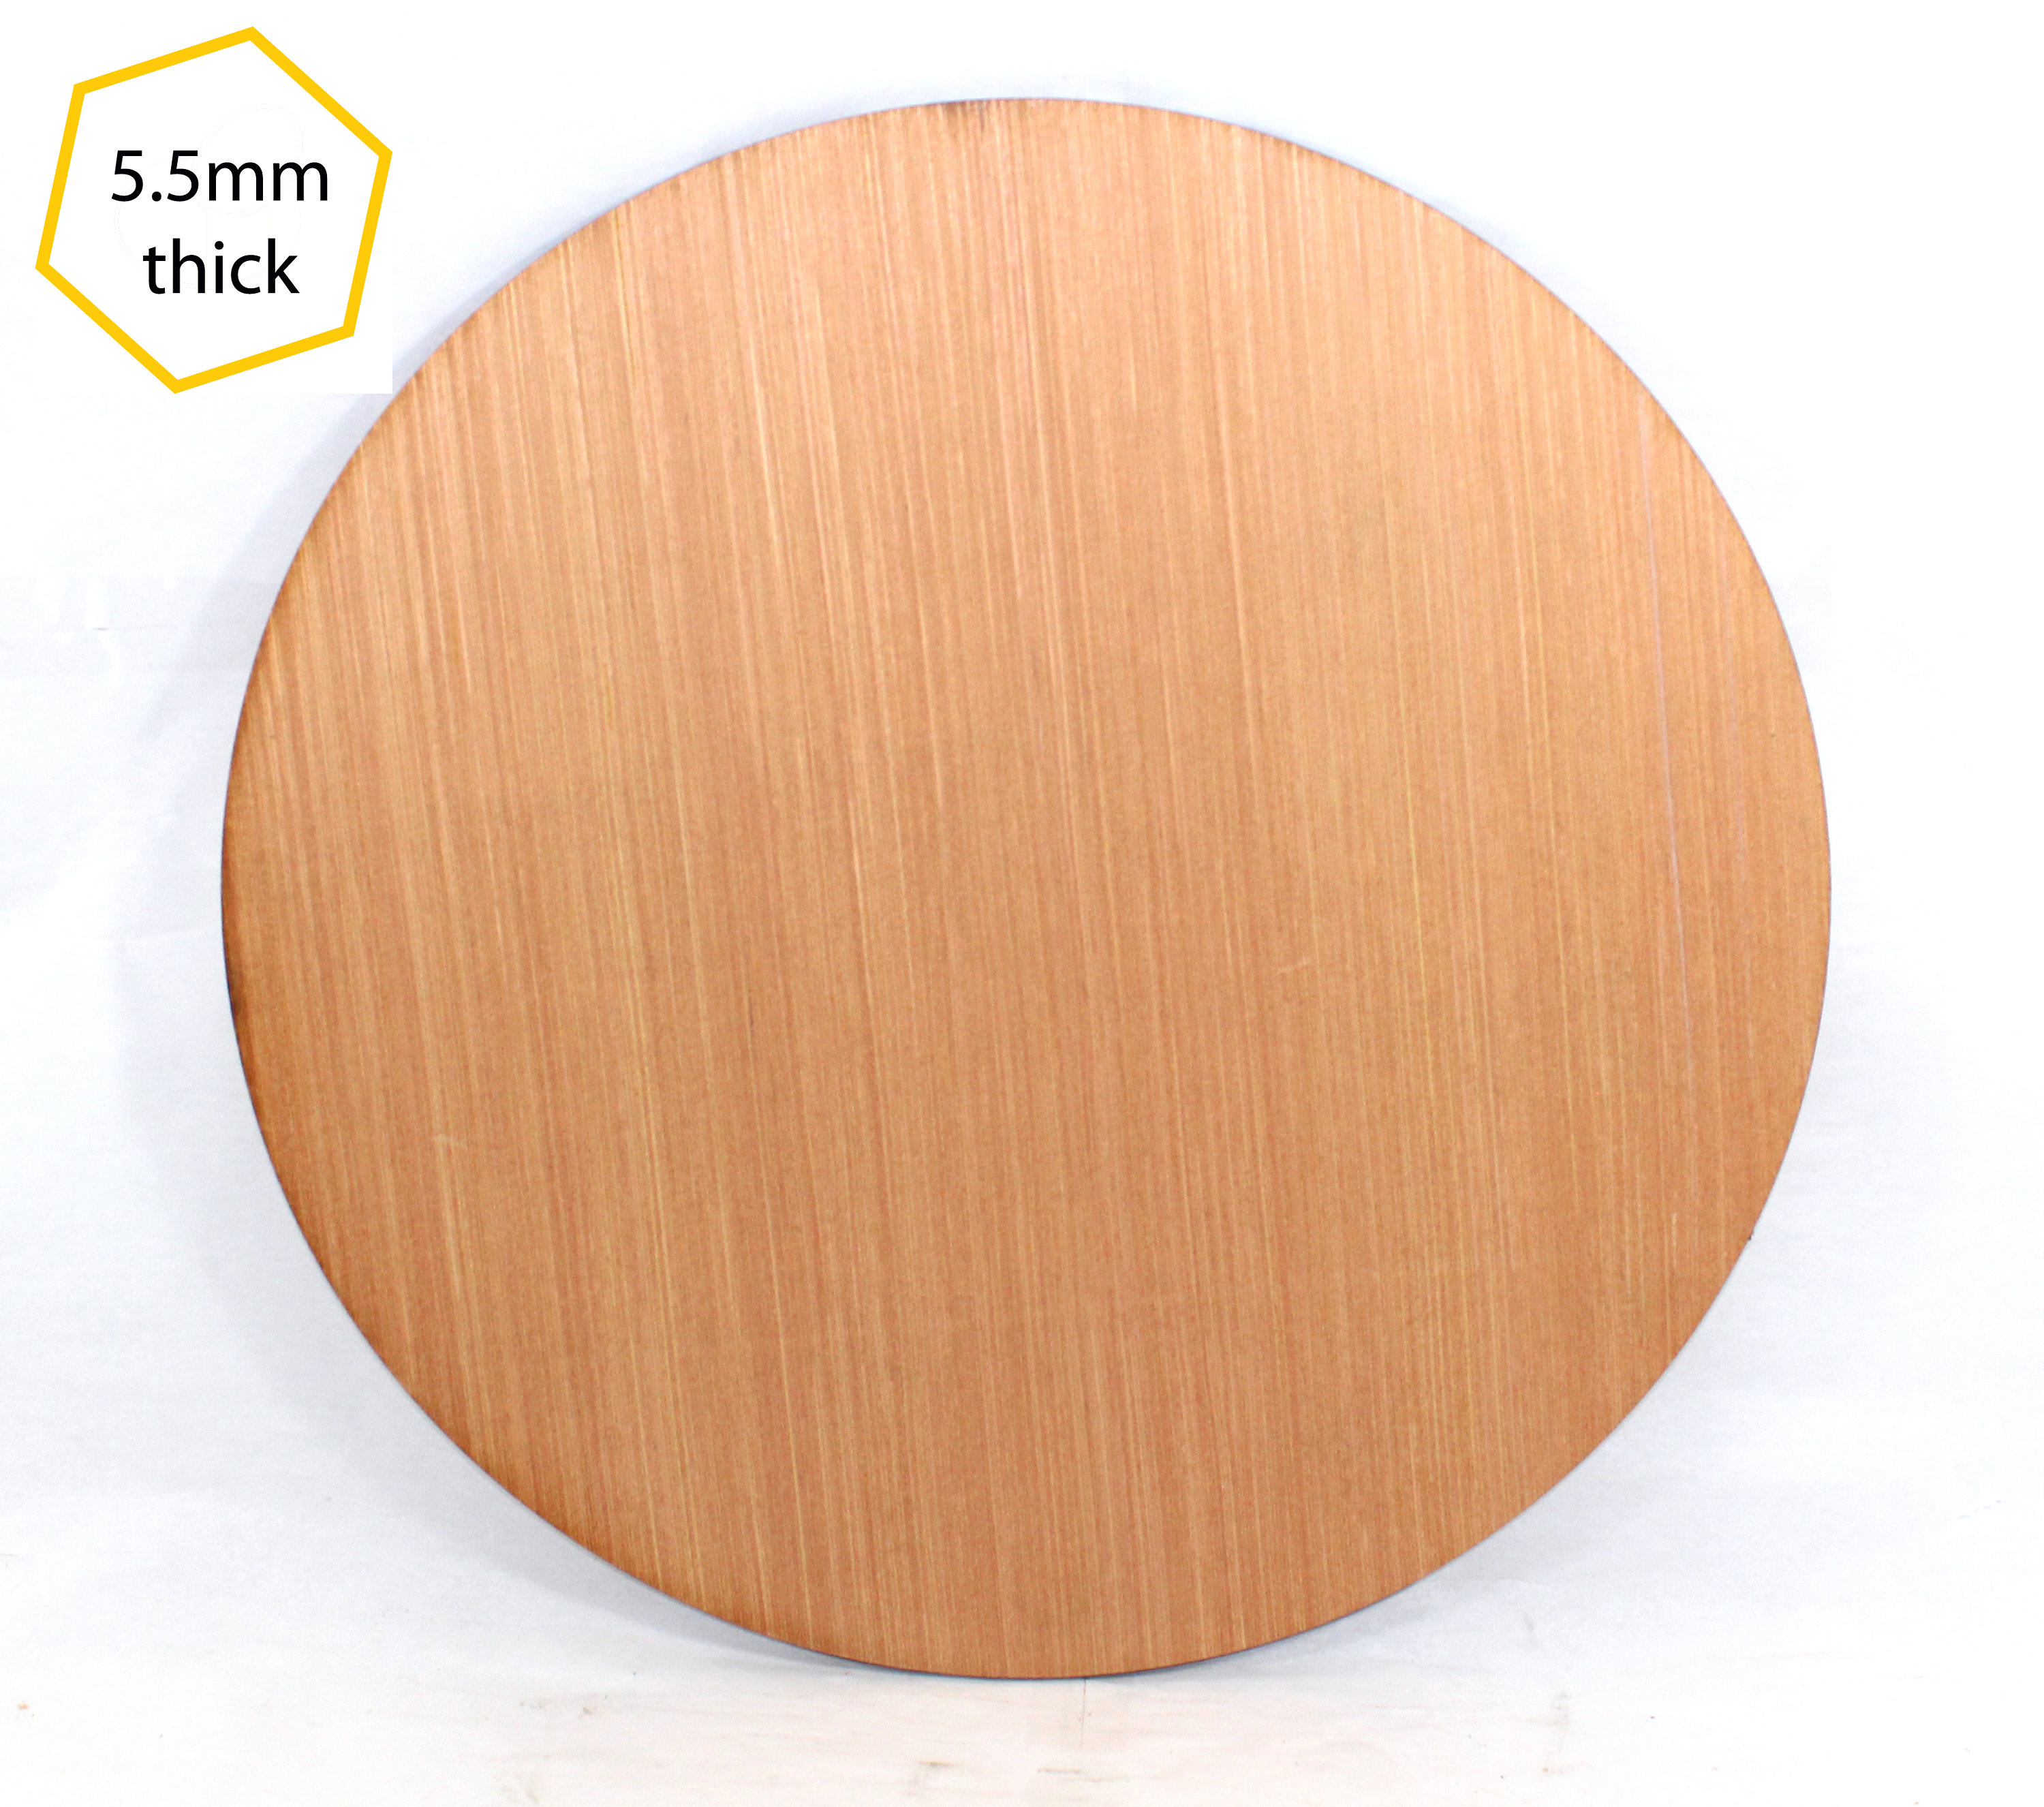 Wooden Ring Shape for Crafts and Decoration Laser Cut Wood Circle